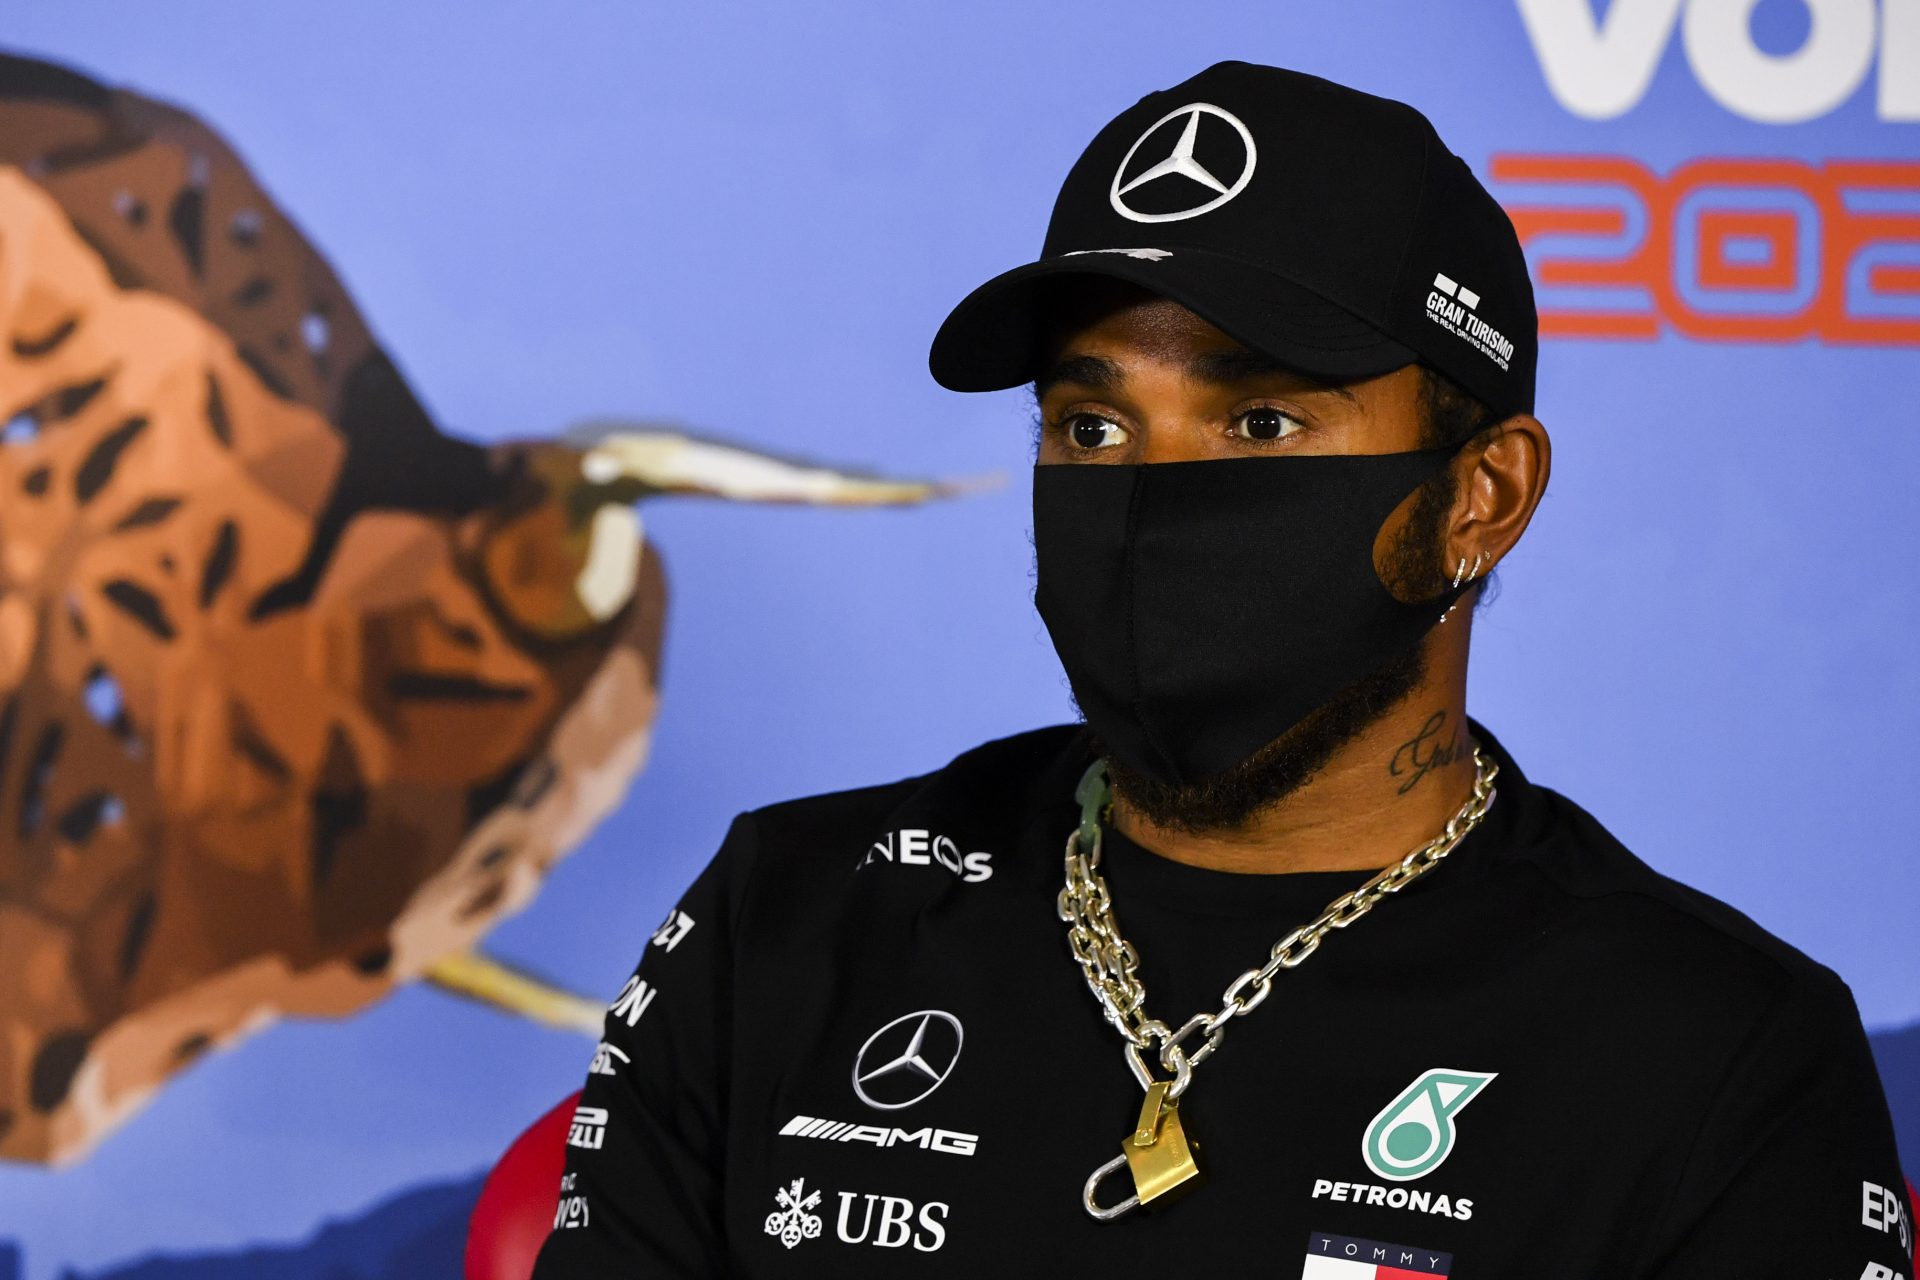 Lewis Hamilton and Valteri Bottas struggled with tyyre issues for the second consecutive week.